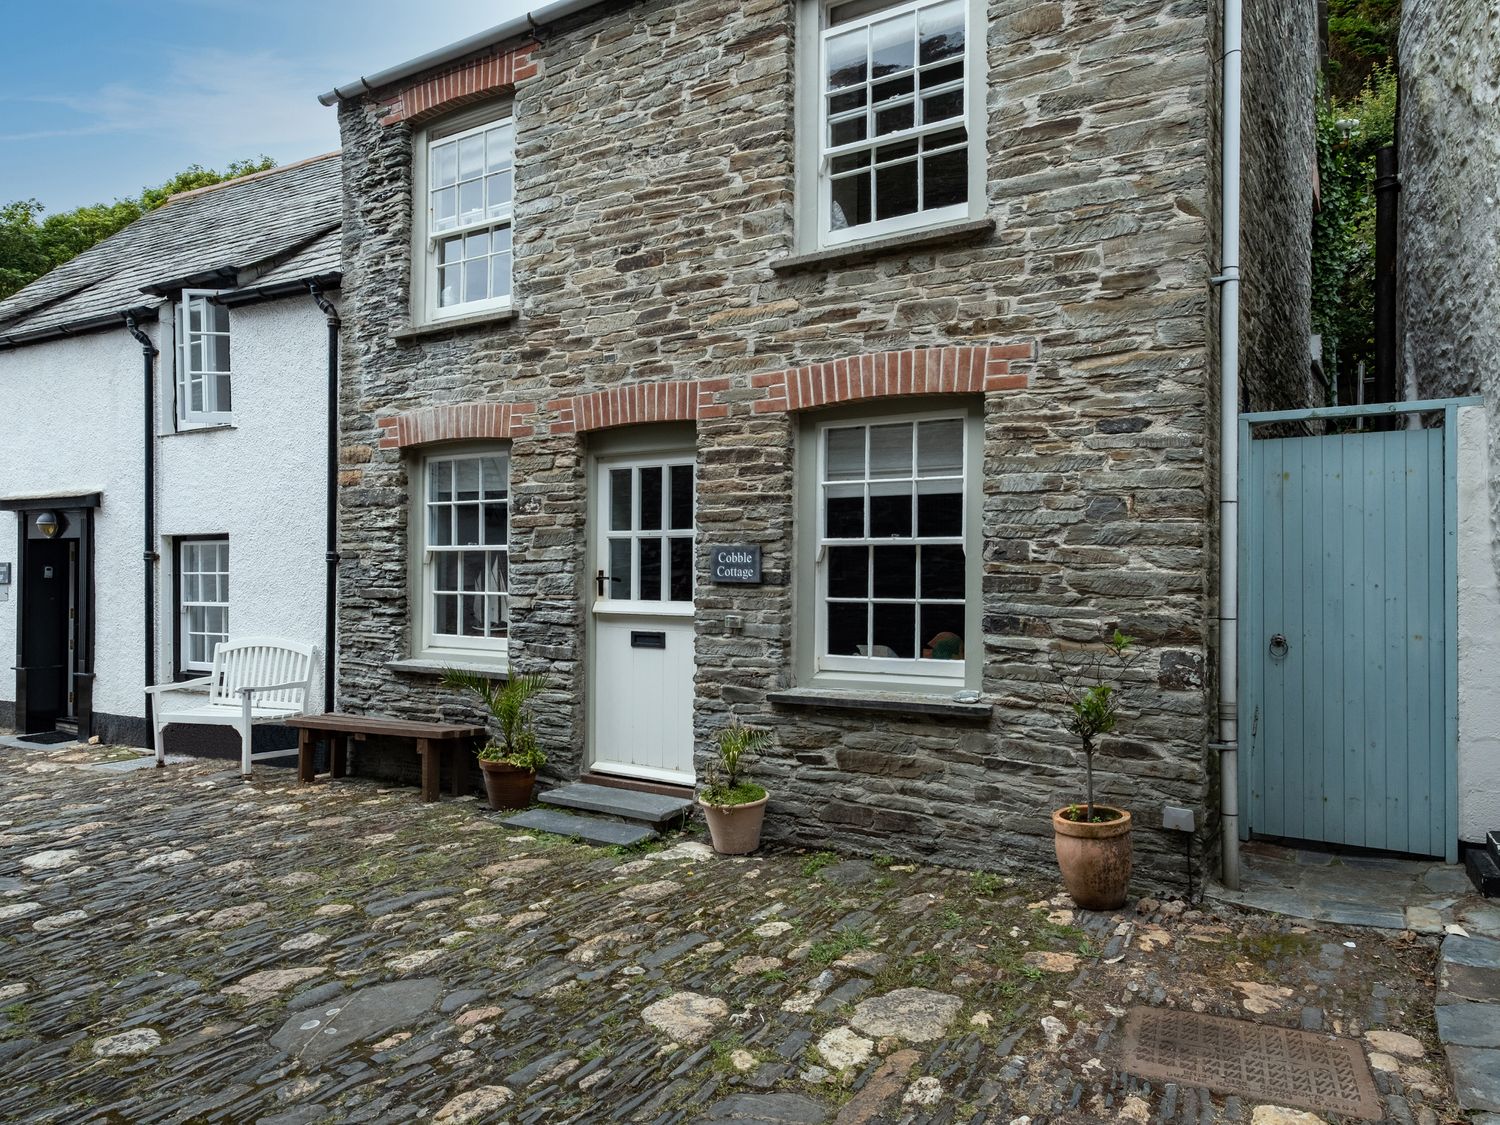 Cobble Cottage - Cornwall - 938196 - photo 1